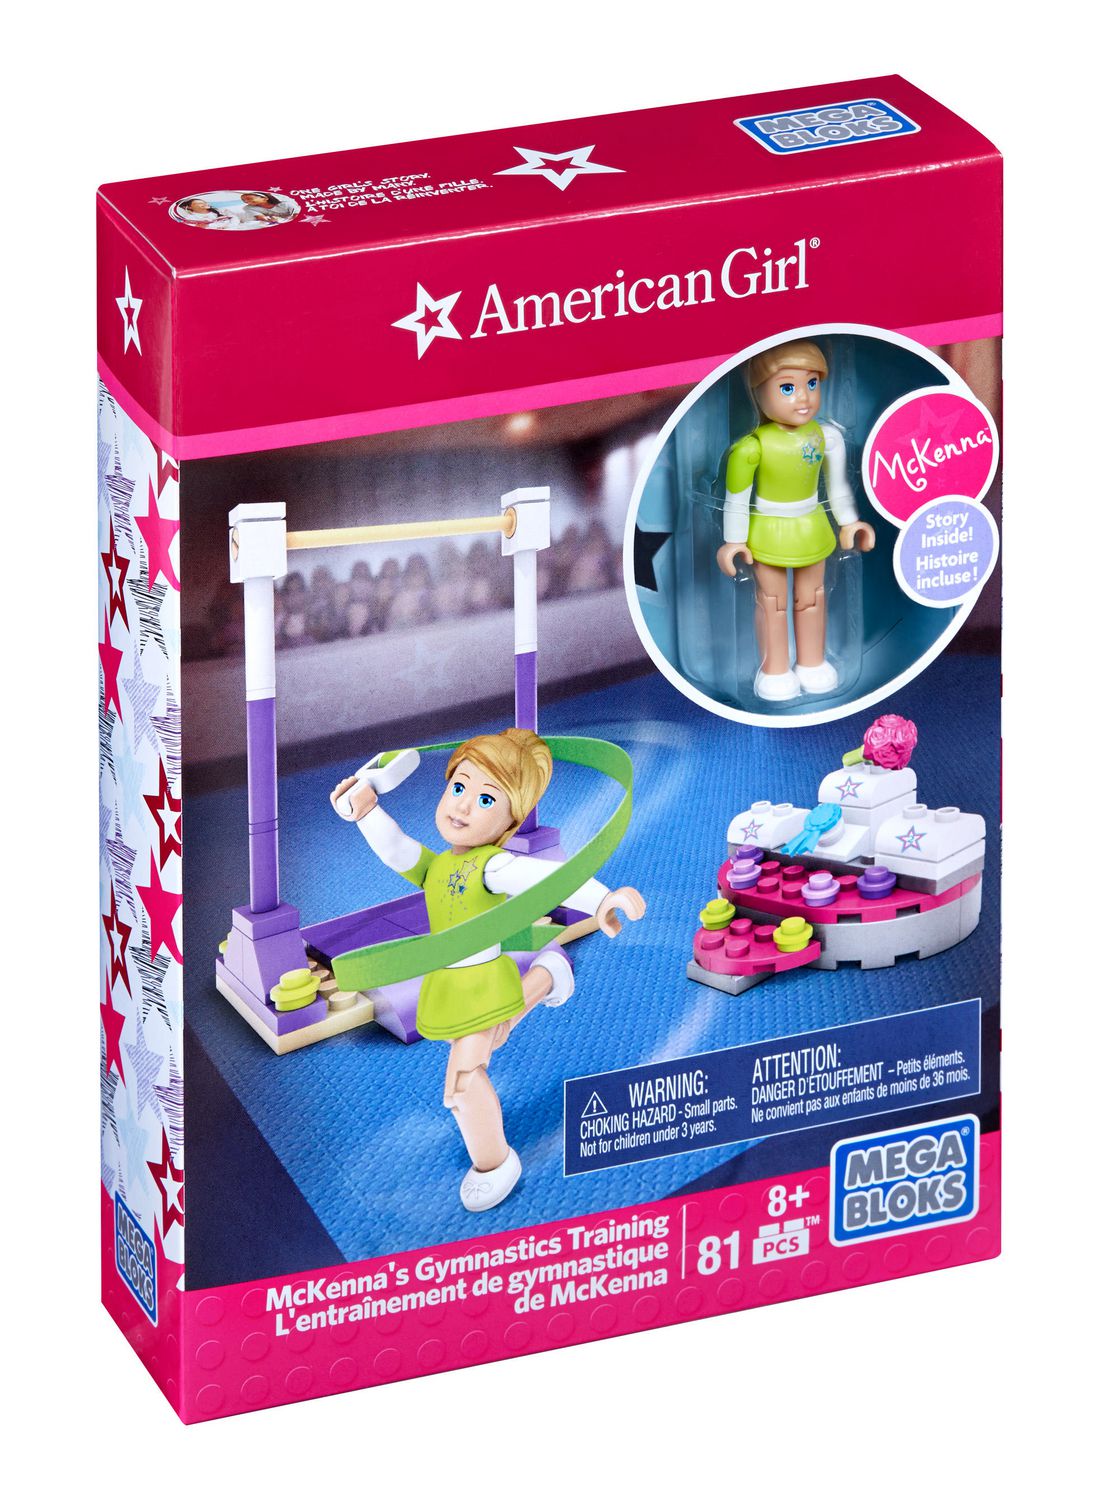 Get In Shape Girl 1 by Hasbro Toy Commercial 